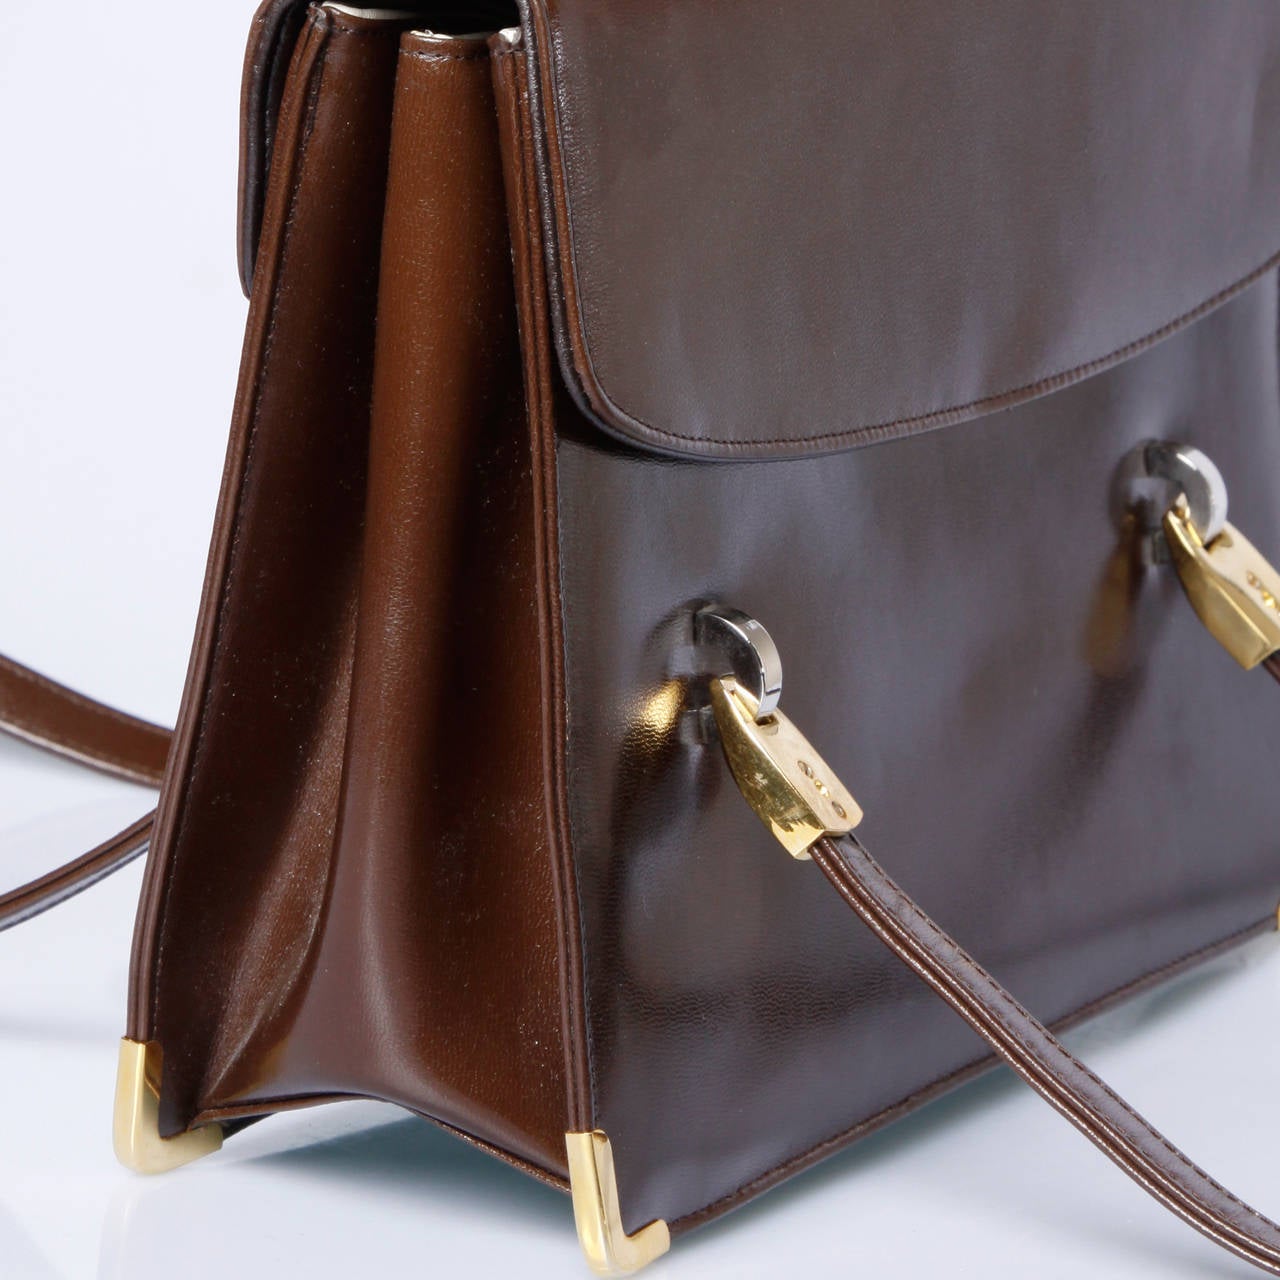 Vintage chocolate brown leather bag by Koret. Multiple inside pockets and matching coin purse.

Details:

Fully Lined
3 Inside Pockets/ 2 With Zippers
Matching Coin Purse
Front Magnet Closure
Color: Rich Chocolate Brown/ Spicy Mustard/ Gold